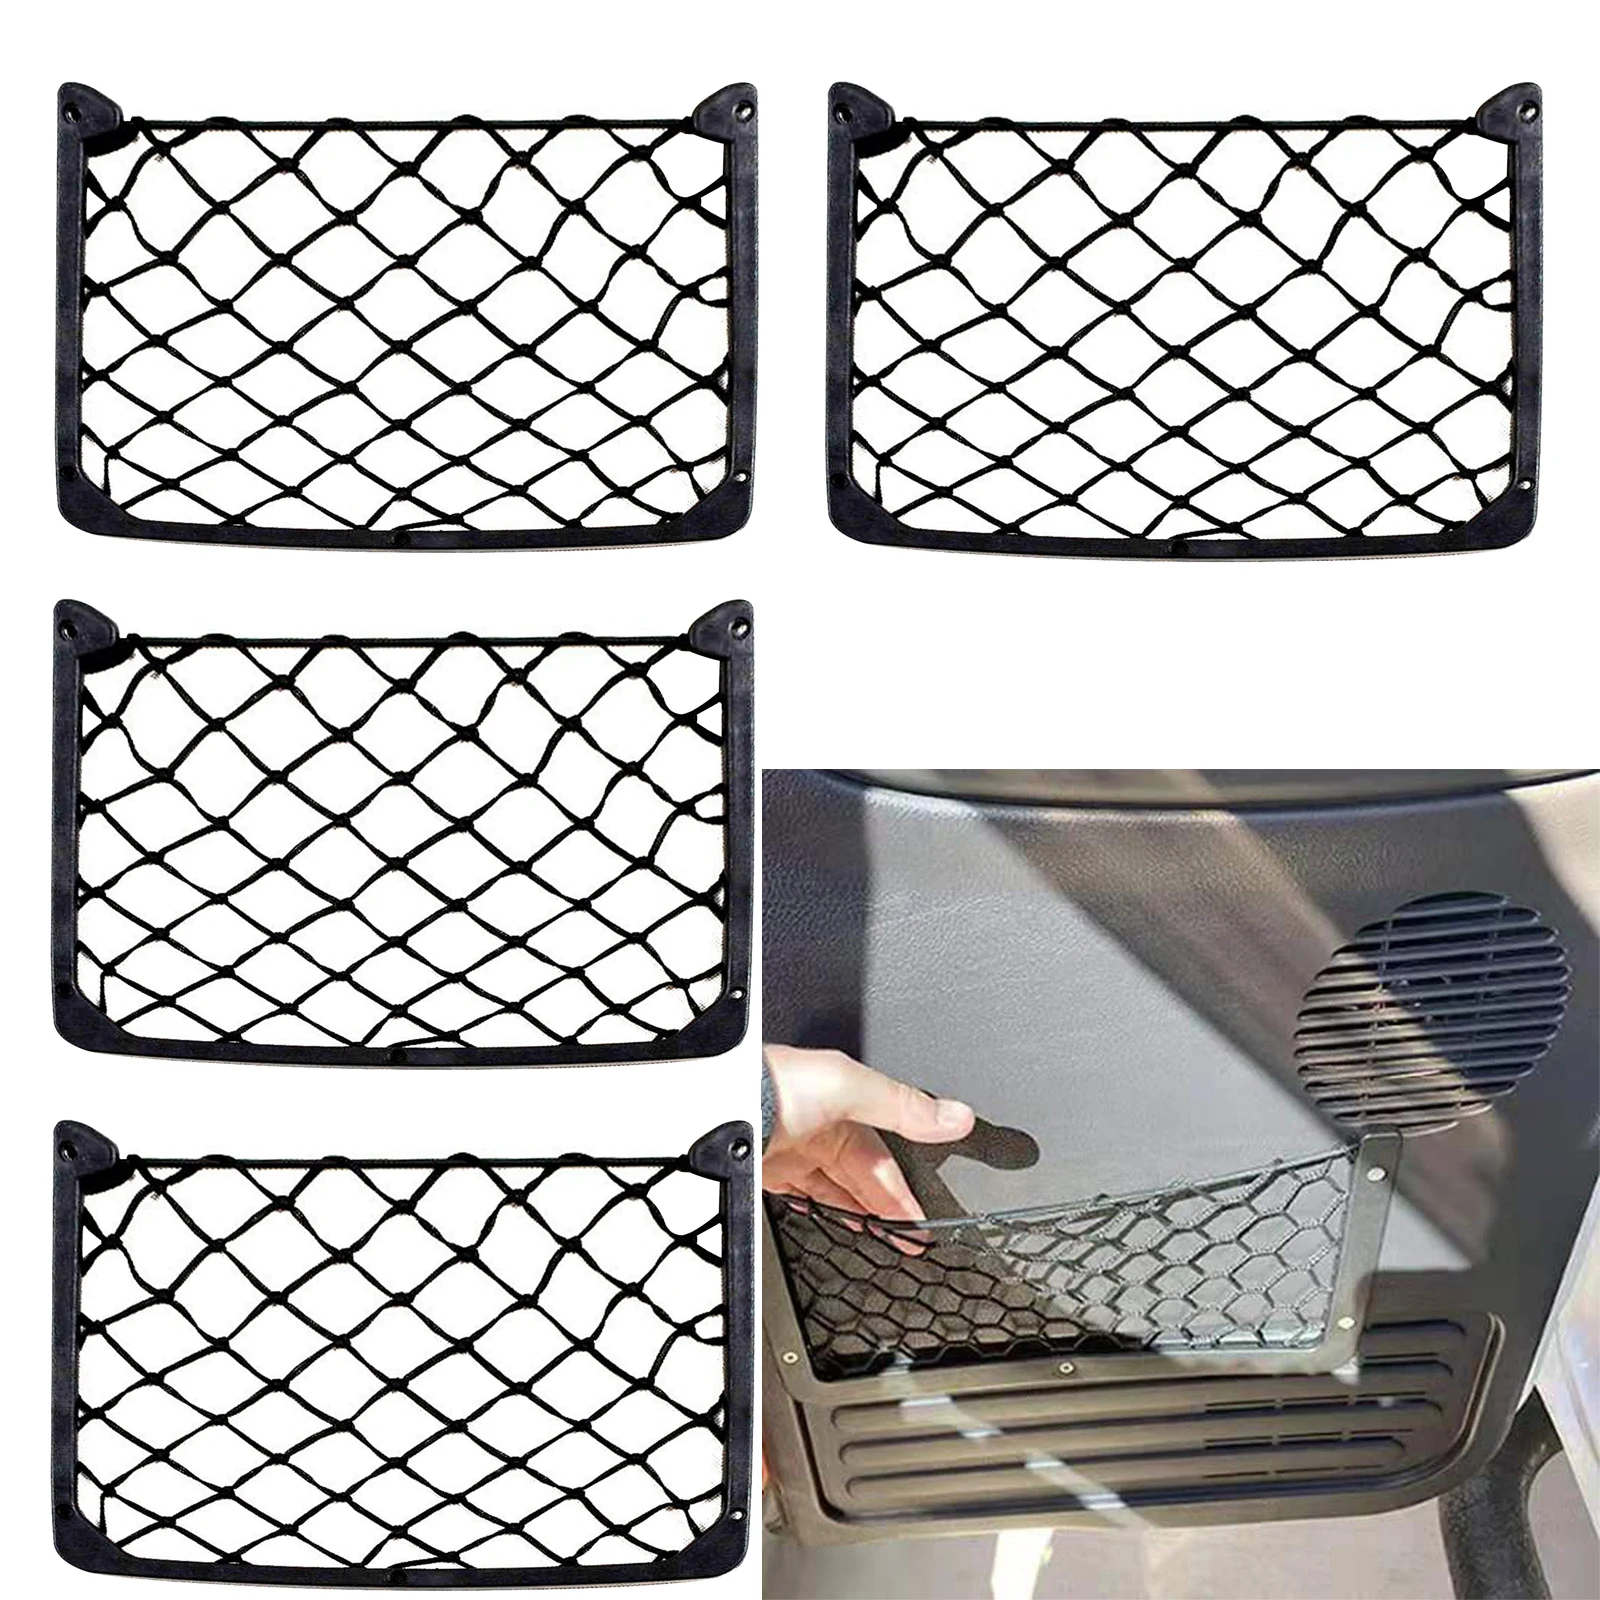 Car Storage Net Large Size ABS Plastic Netting Bag for Car Frame Stretch Mesh Net Universal Cargo with Screws for RV Car Trunk universal car refit manual transmission gear shift handball knob with four plastic adapter special wrench mounting screws